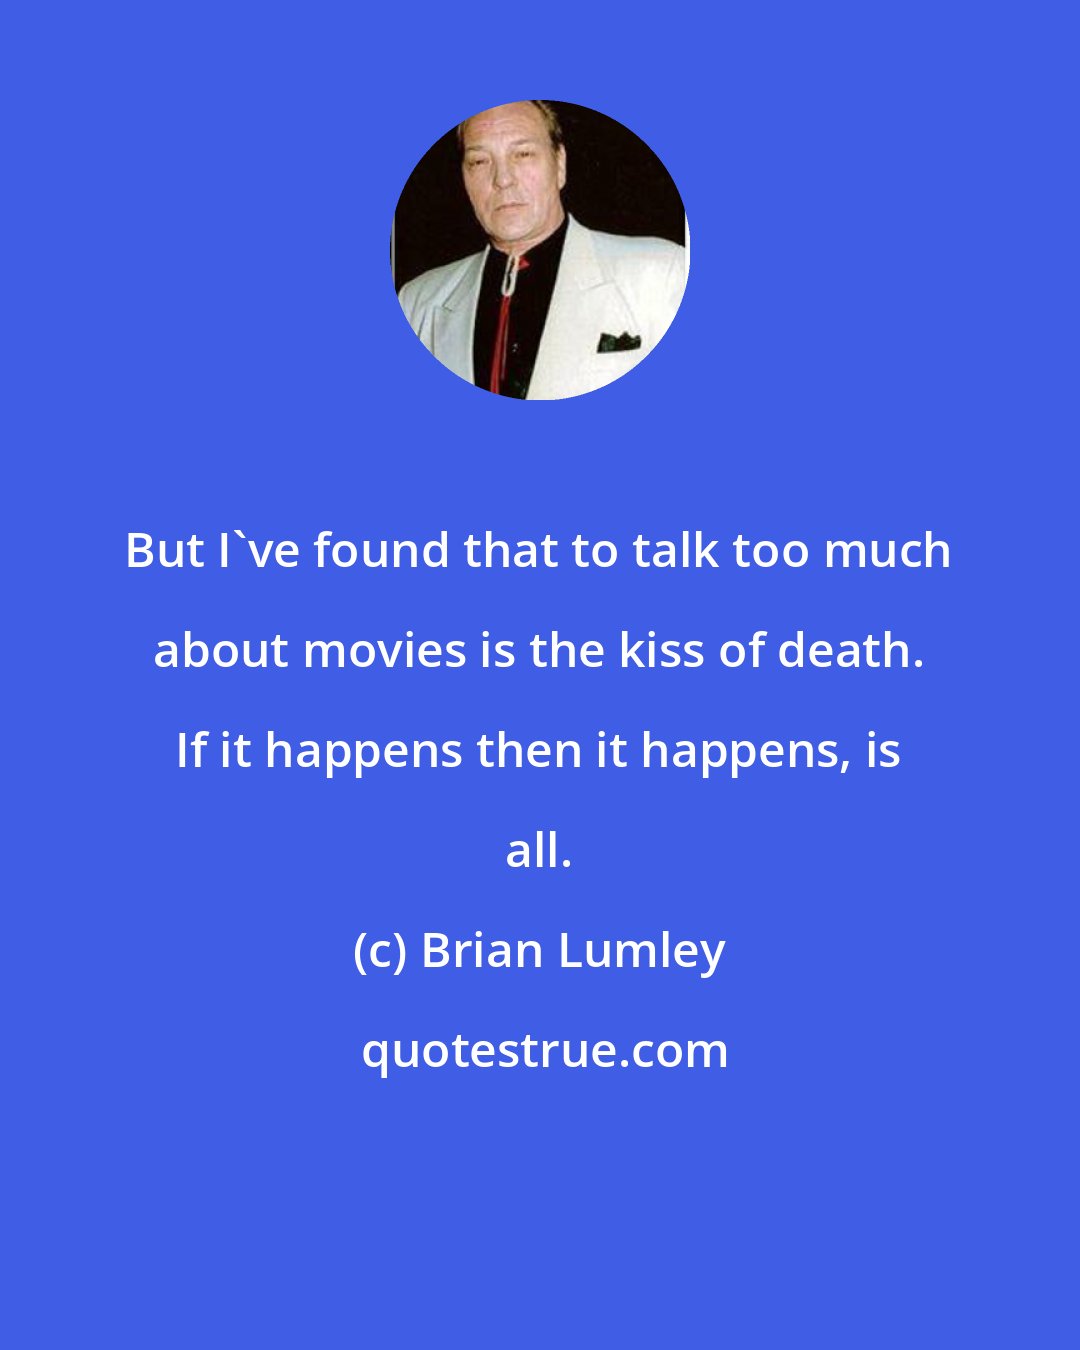 Brian Lumley: But I've found that to talk too much about movies is the kiss of death. If it happens then it happens, is all.